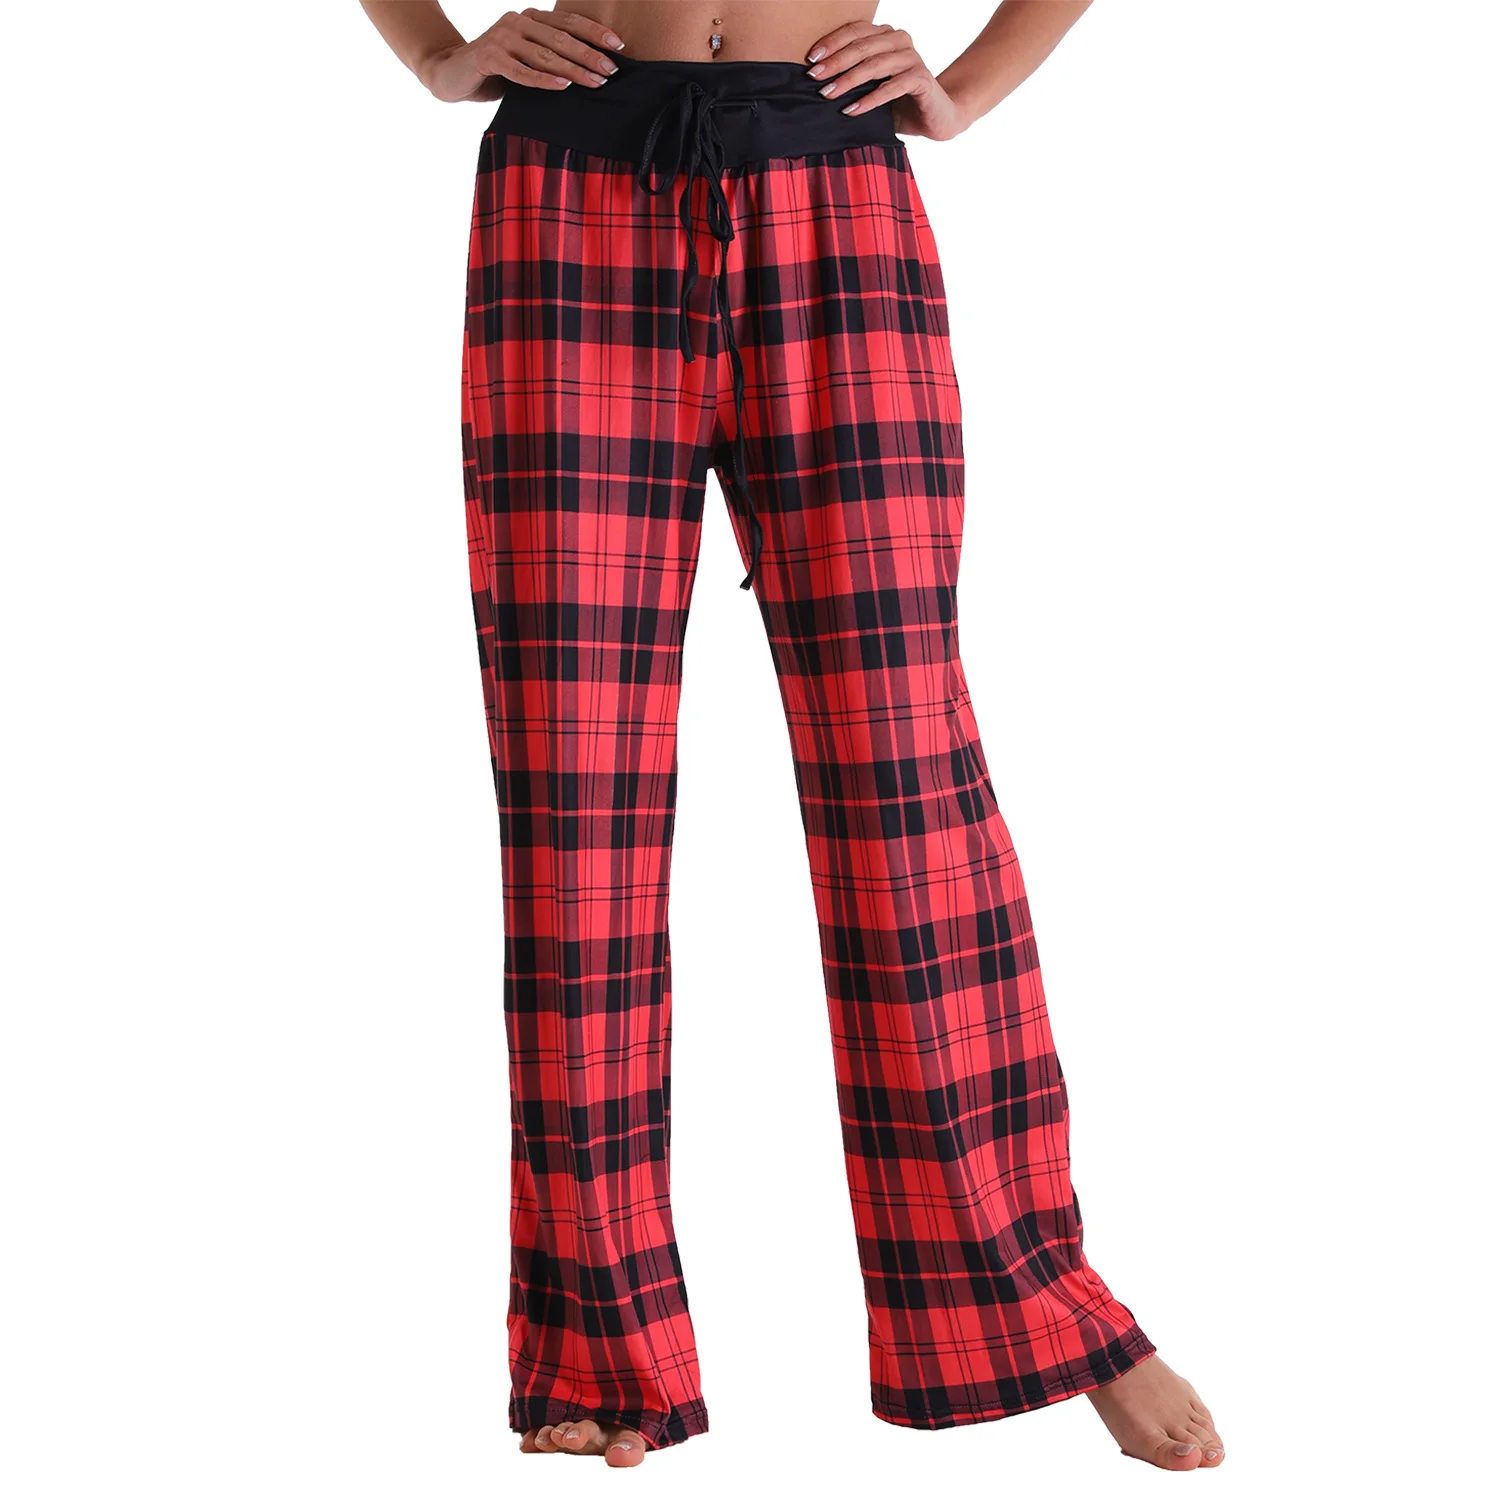 

polyester cotton high waisted buffalo plaid pj womens pajama pants, Picture shows